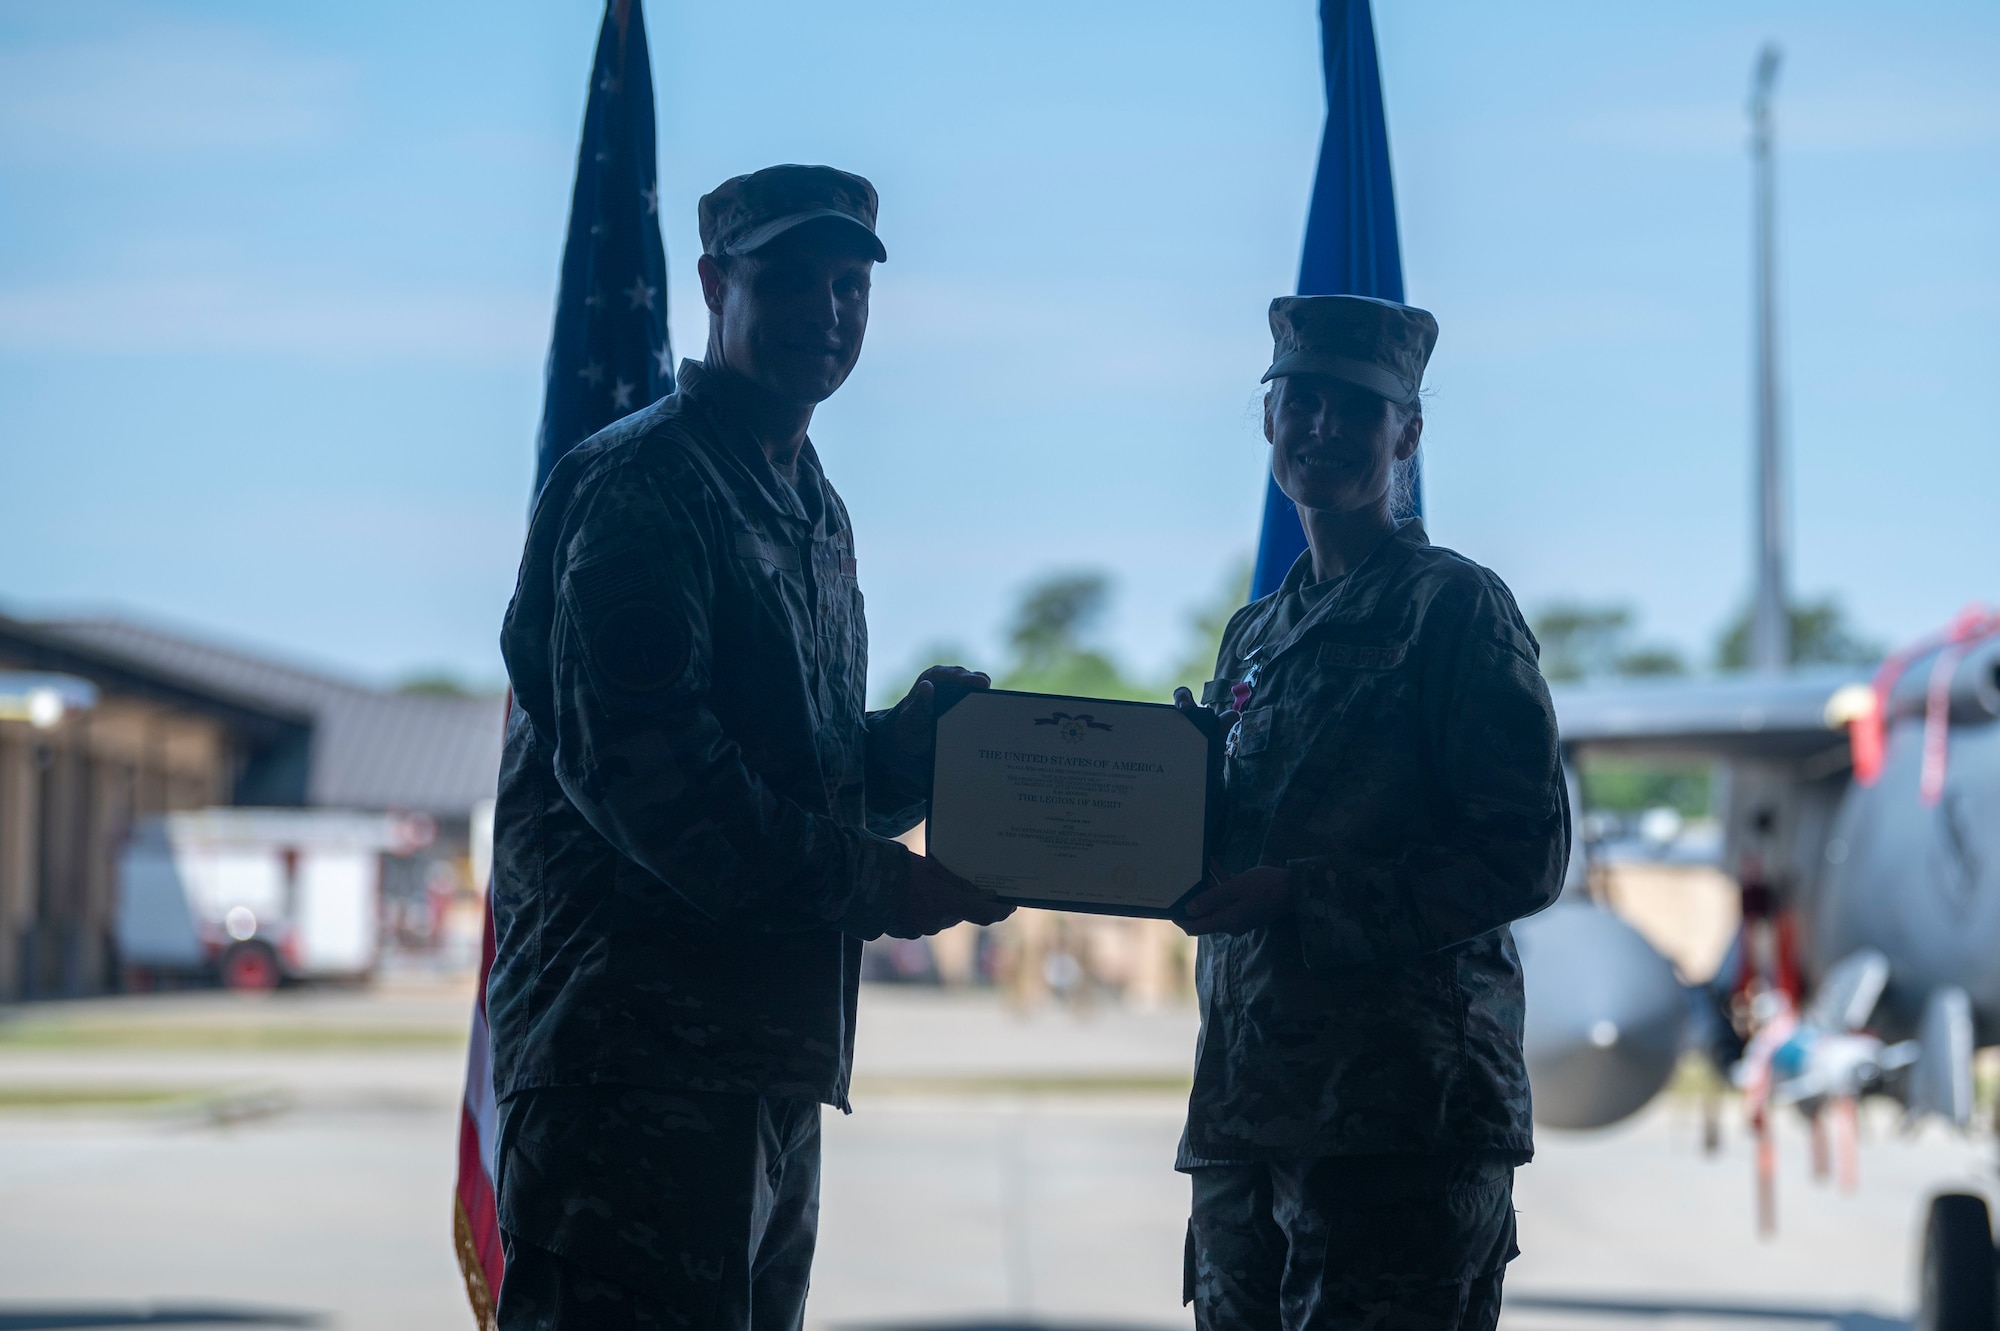 Col. Lucas Teel, 4th Fighter Wing commander, presents the Legion of Merit award to Col. Leah Fry, outgoing 4th Maintenance Group commander, before she relinquishes command at Seymour Johnson Air Force Base, North Carolina, June 3, 2022. The Legion of Merit is given for exceptionally meritorious conduct in the performance of outstanding services and achievement. (U.S. Air Force photo by Senior Airman Kevin Holloway)